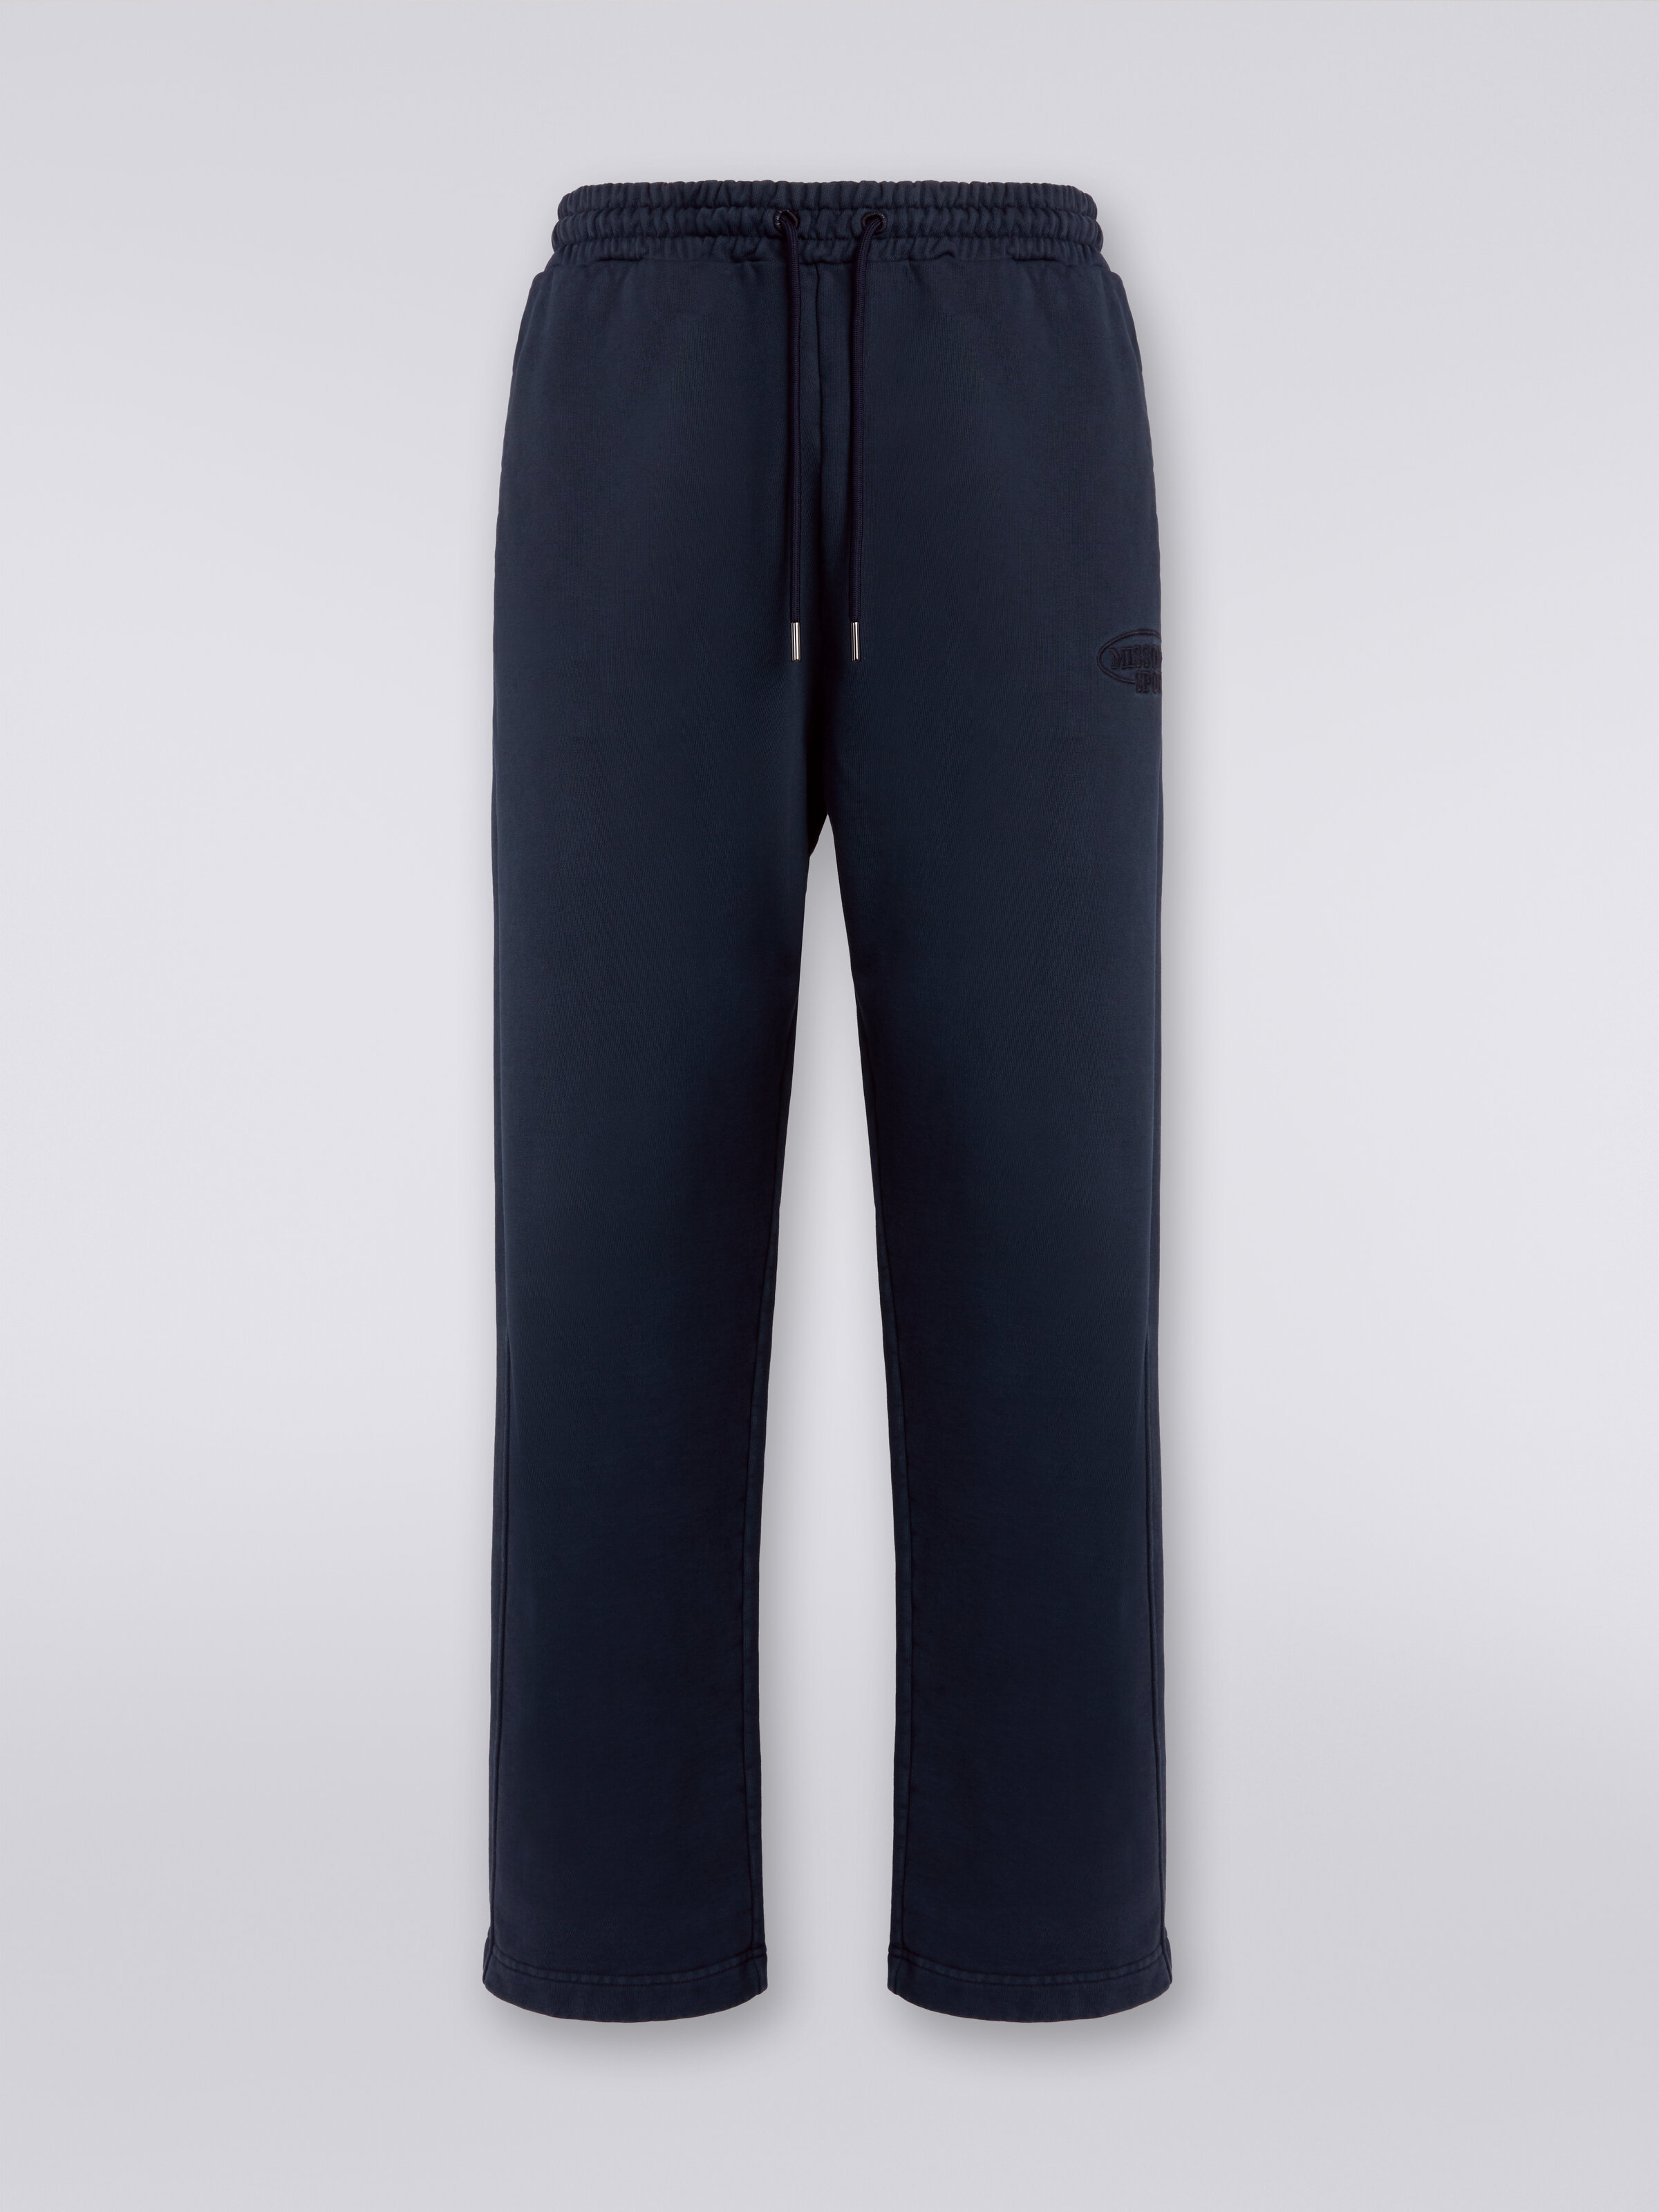 Trousers in cotton fleece with logo, Navy Blue  - 0